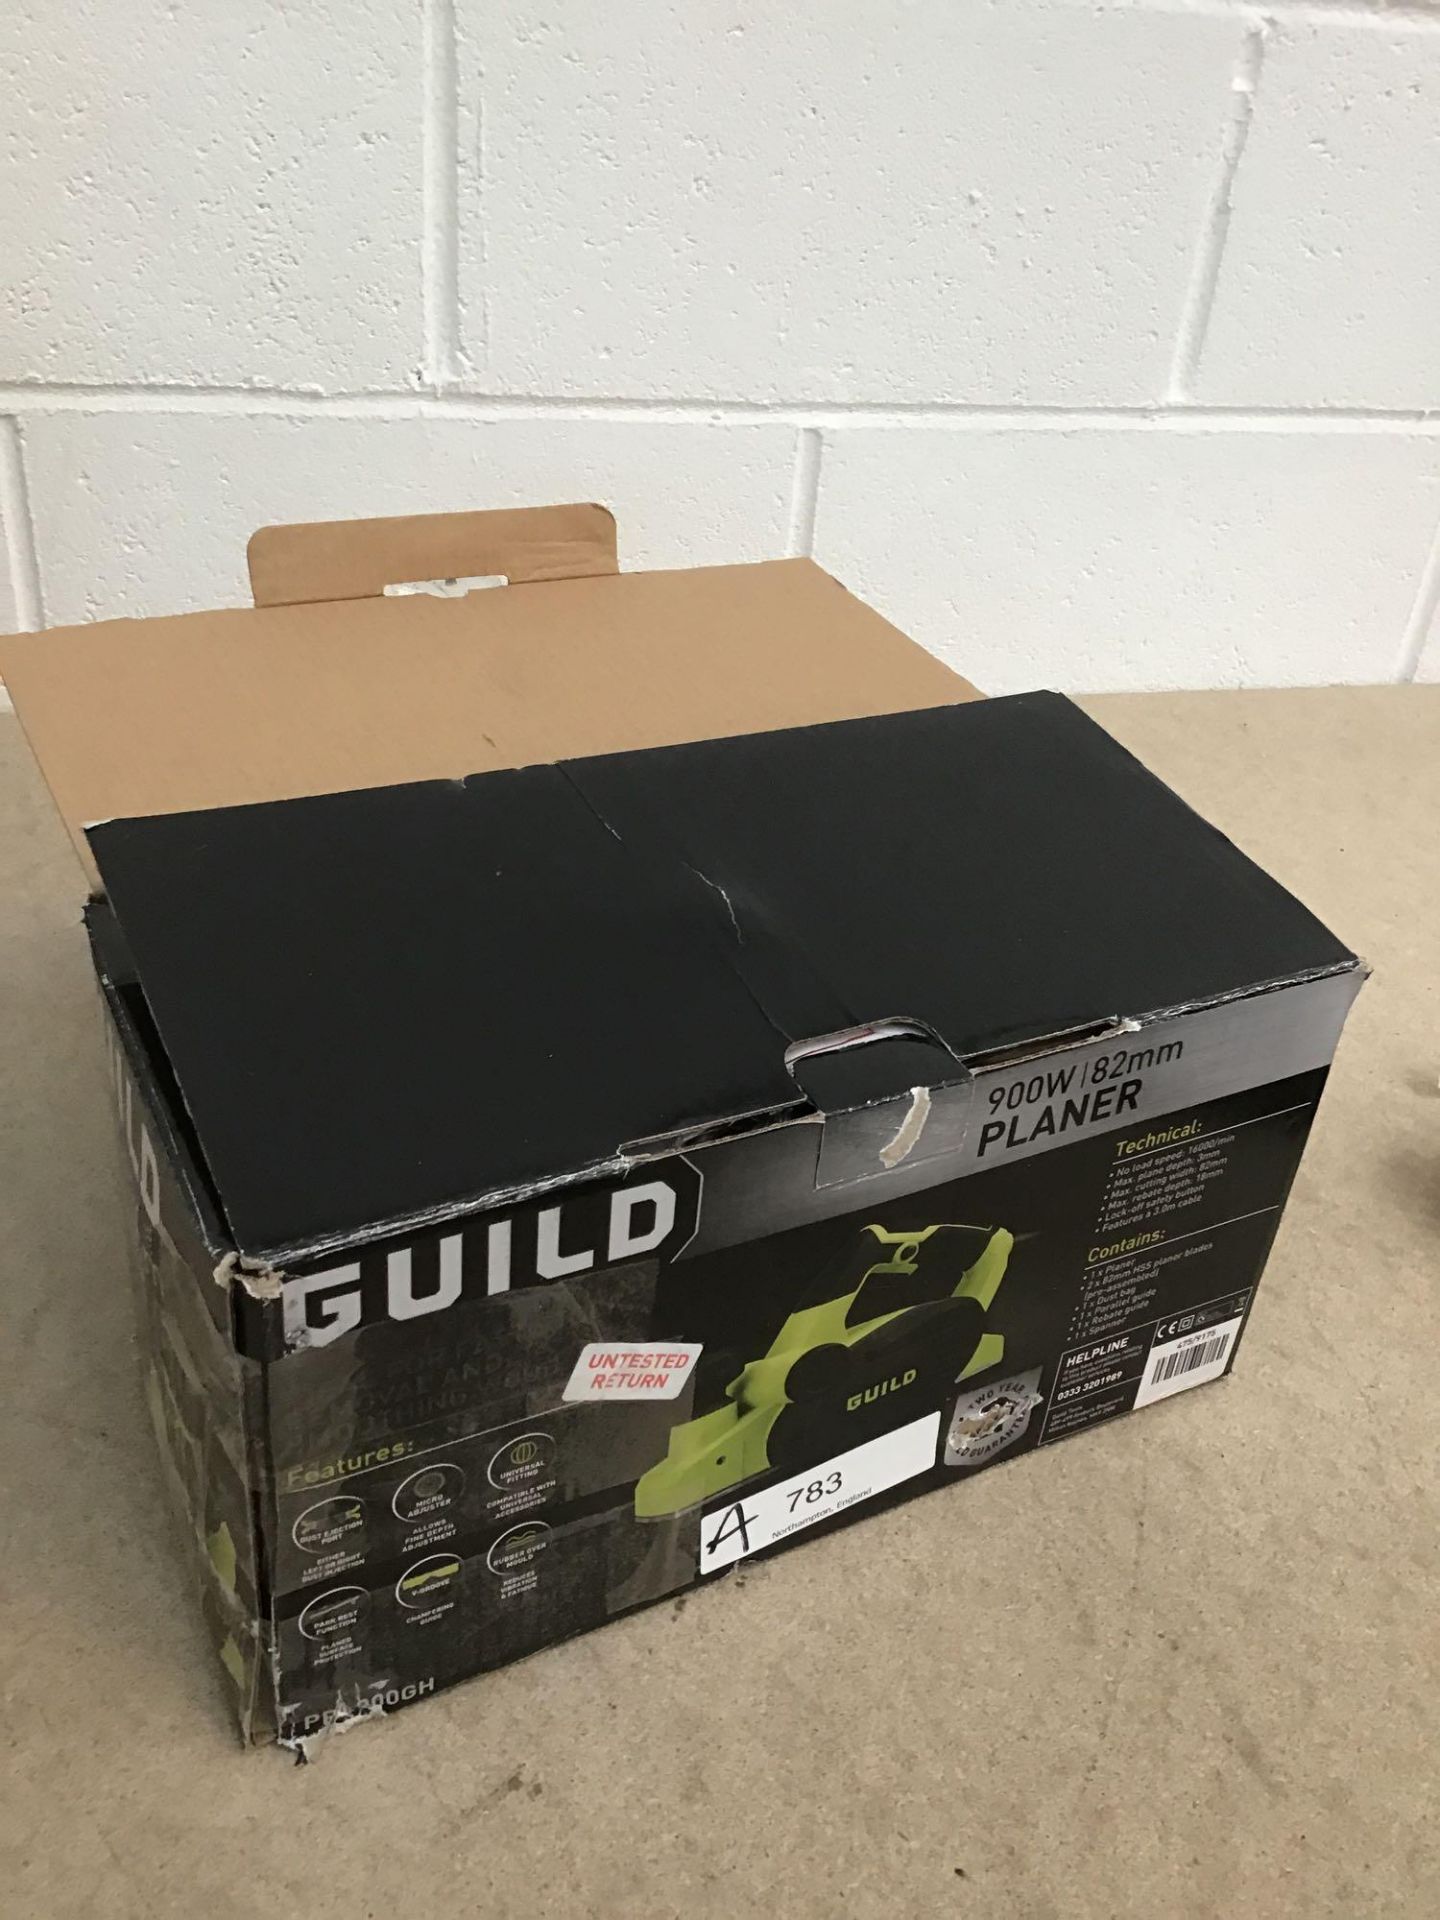 Guild Planer - 900W - £50.00 RRP - Image 2 of 5